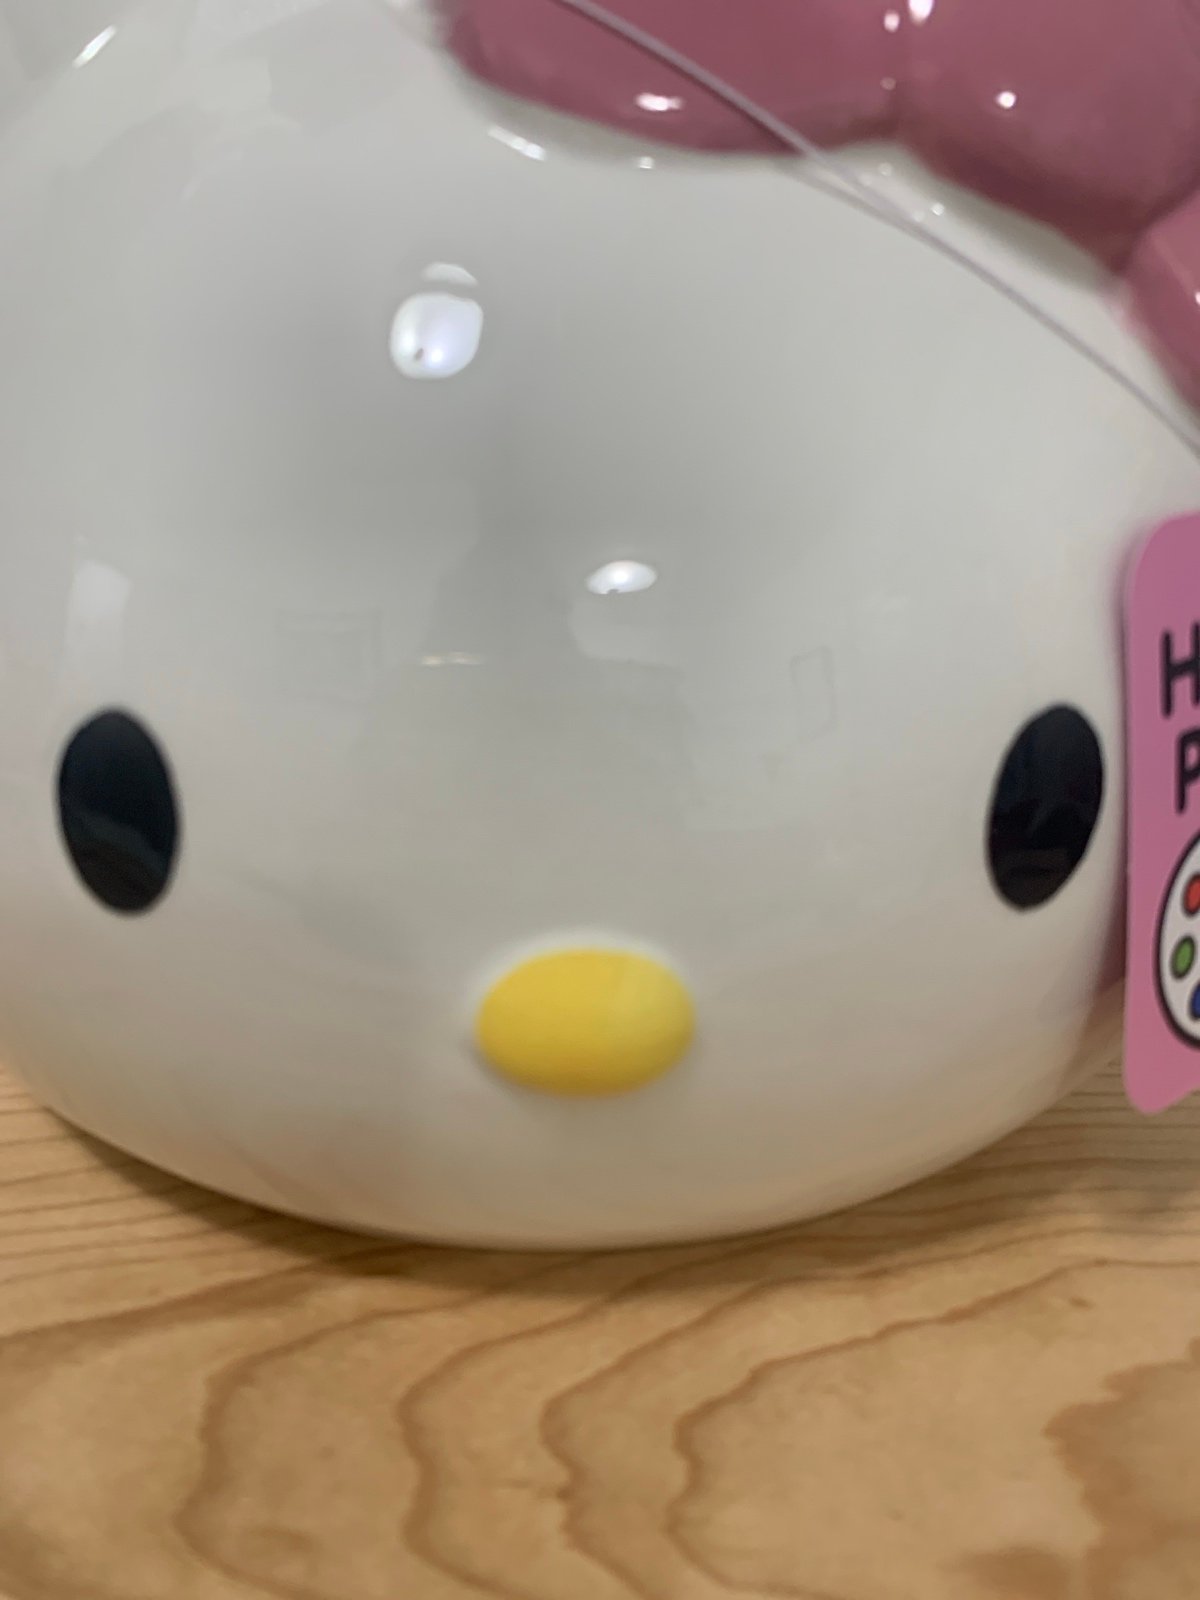 New Sanrio Hello Kitty Ceramic Planter With Pink Bow Tag Attached FOppZBVGD